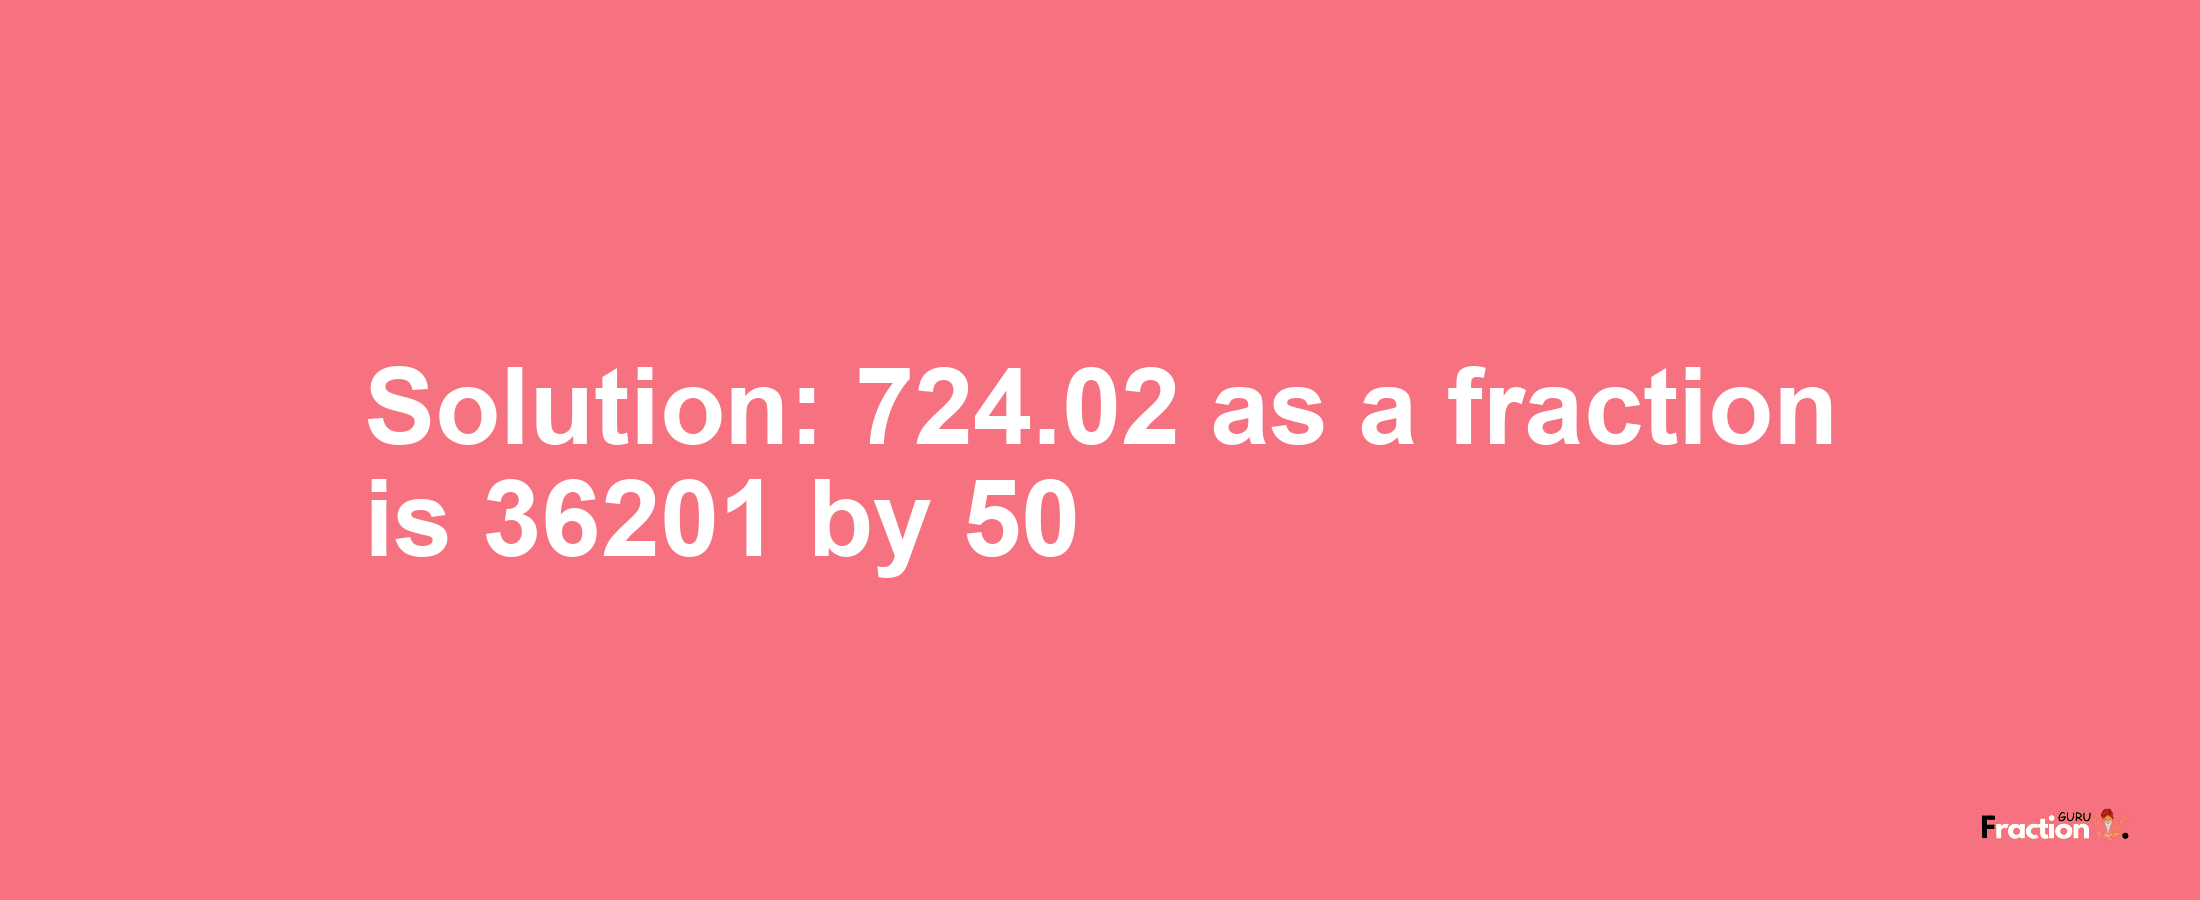 Solution:724.02 as a fraction is 36201/50